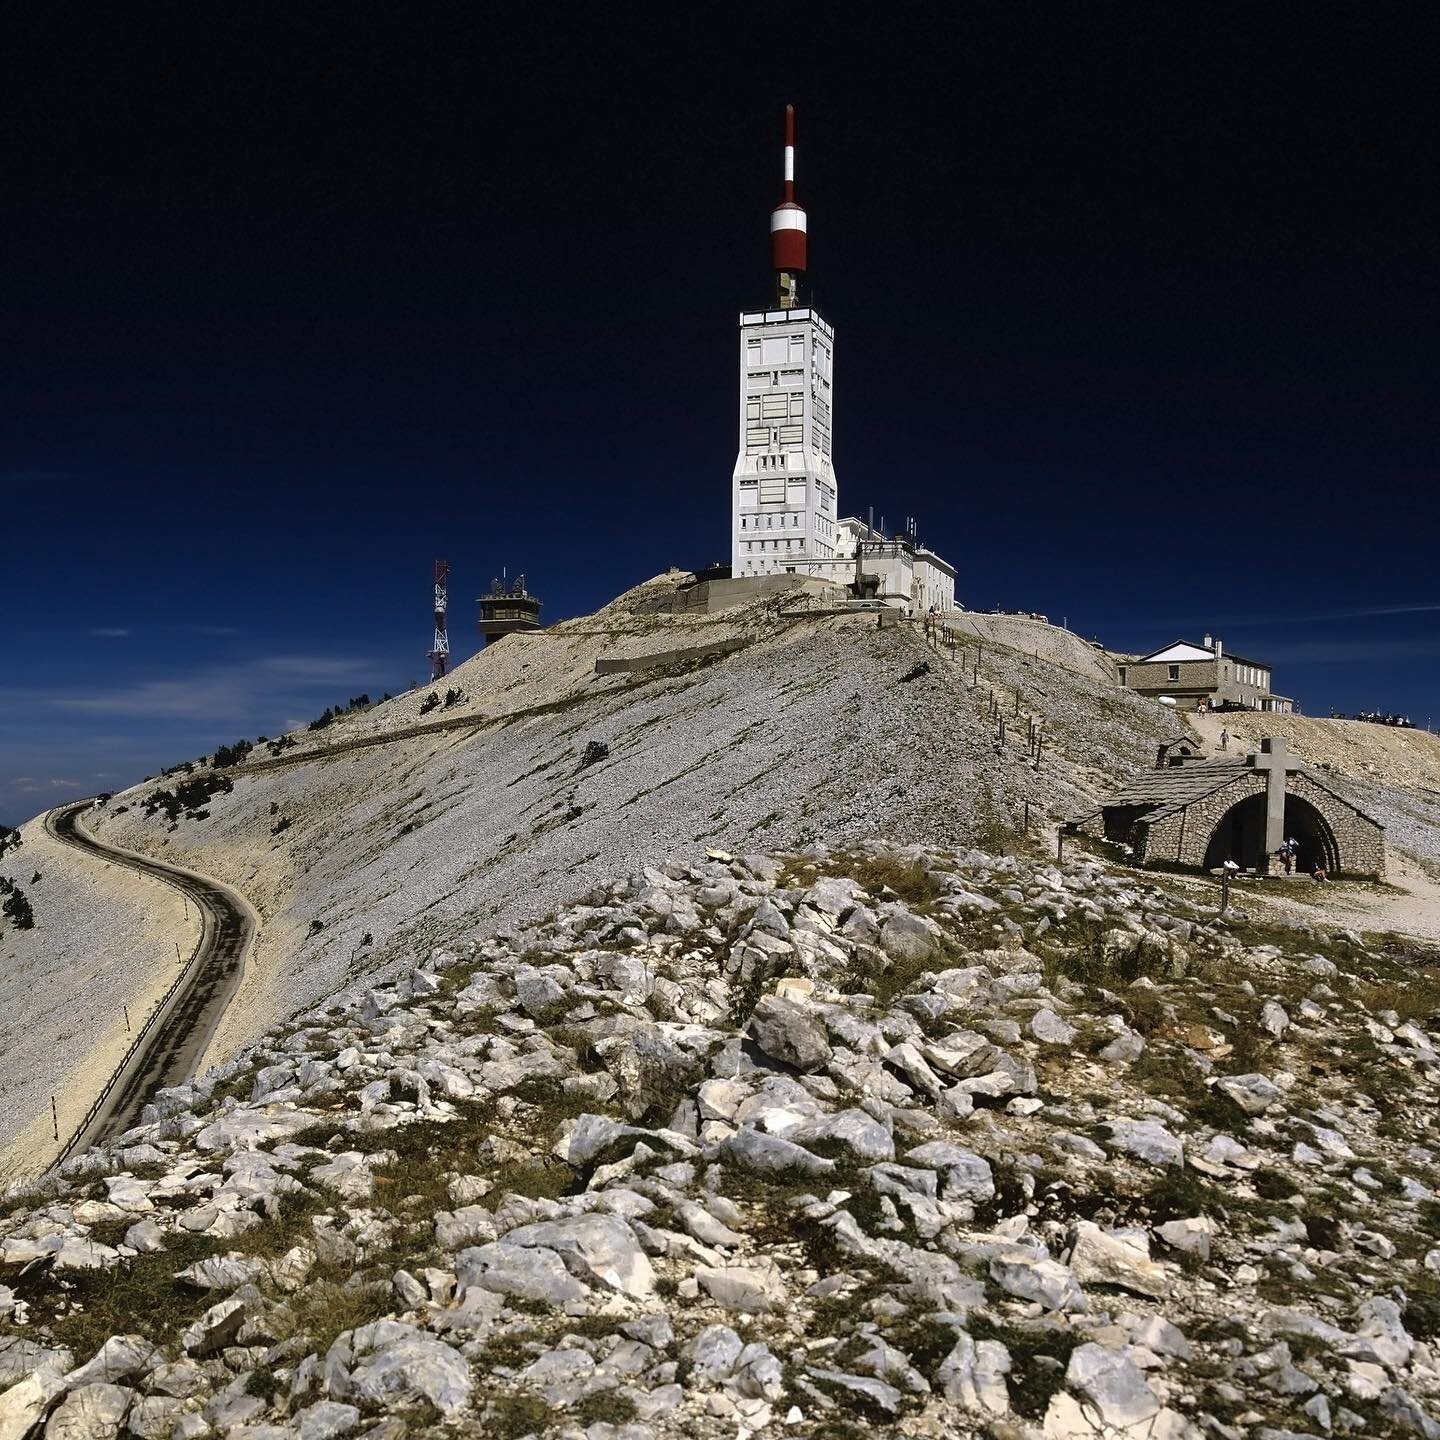 This is not the moon. It&rsquo;s the summit of Mont Ventoux in France. The lunar spectacular mont is nicknamed the &ldquo;beast of Provence&rdquo;. It can get windy at the summit, especially with the mistral; wind speeds as high as 320 km/h (200 mph)